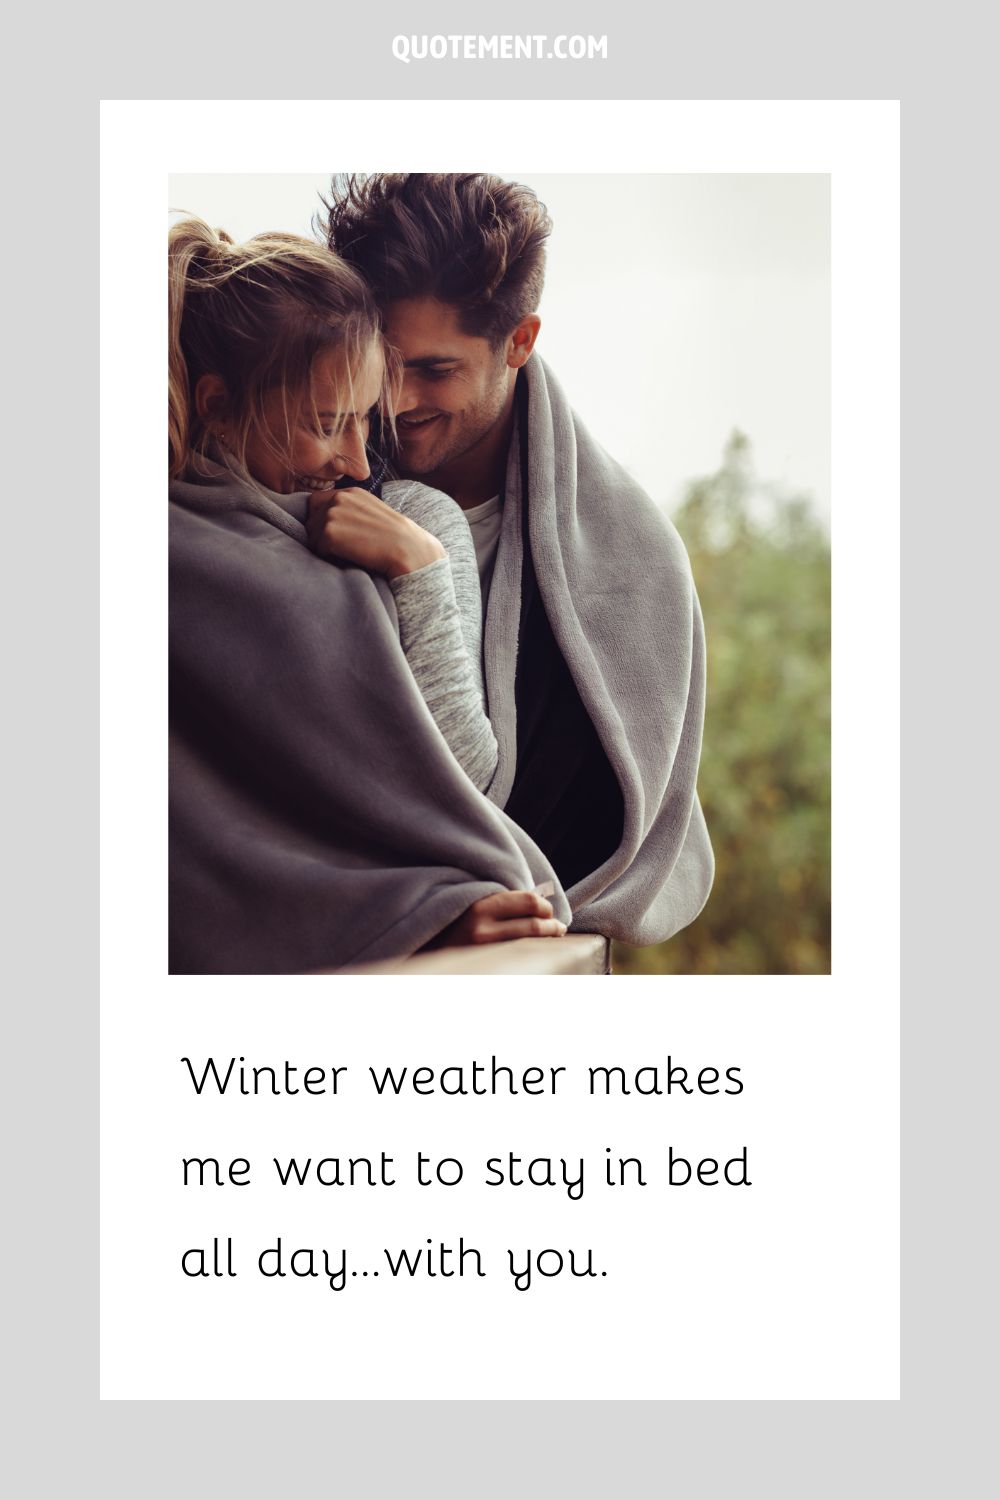 a smiling couple sharing a cozy hug, wrapped in a blanket representing the top winter pick up line